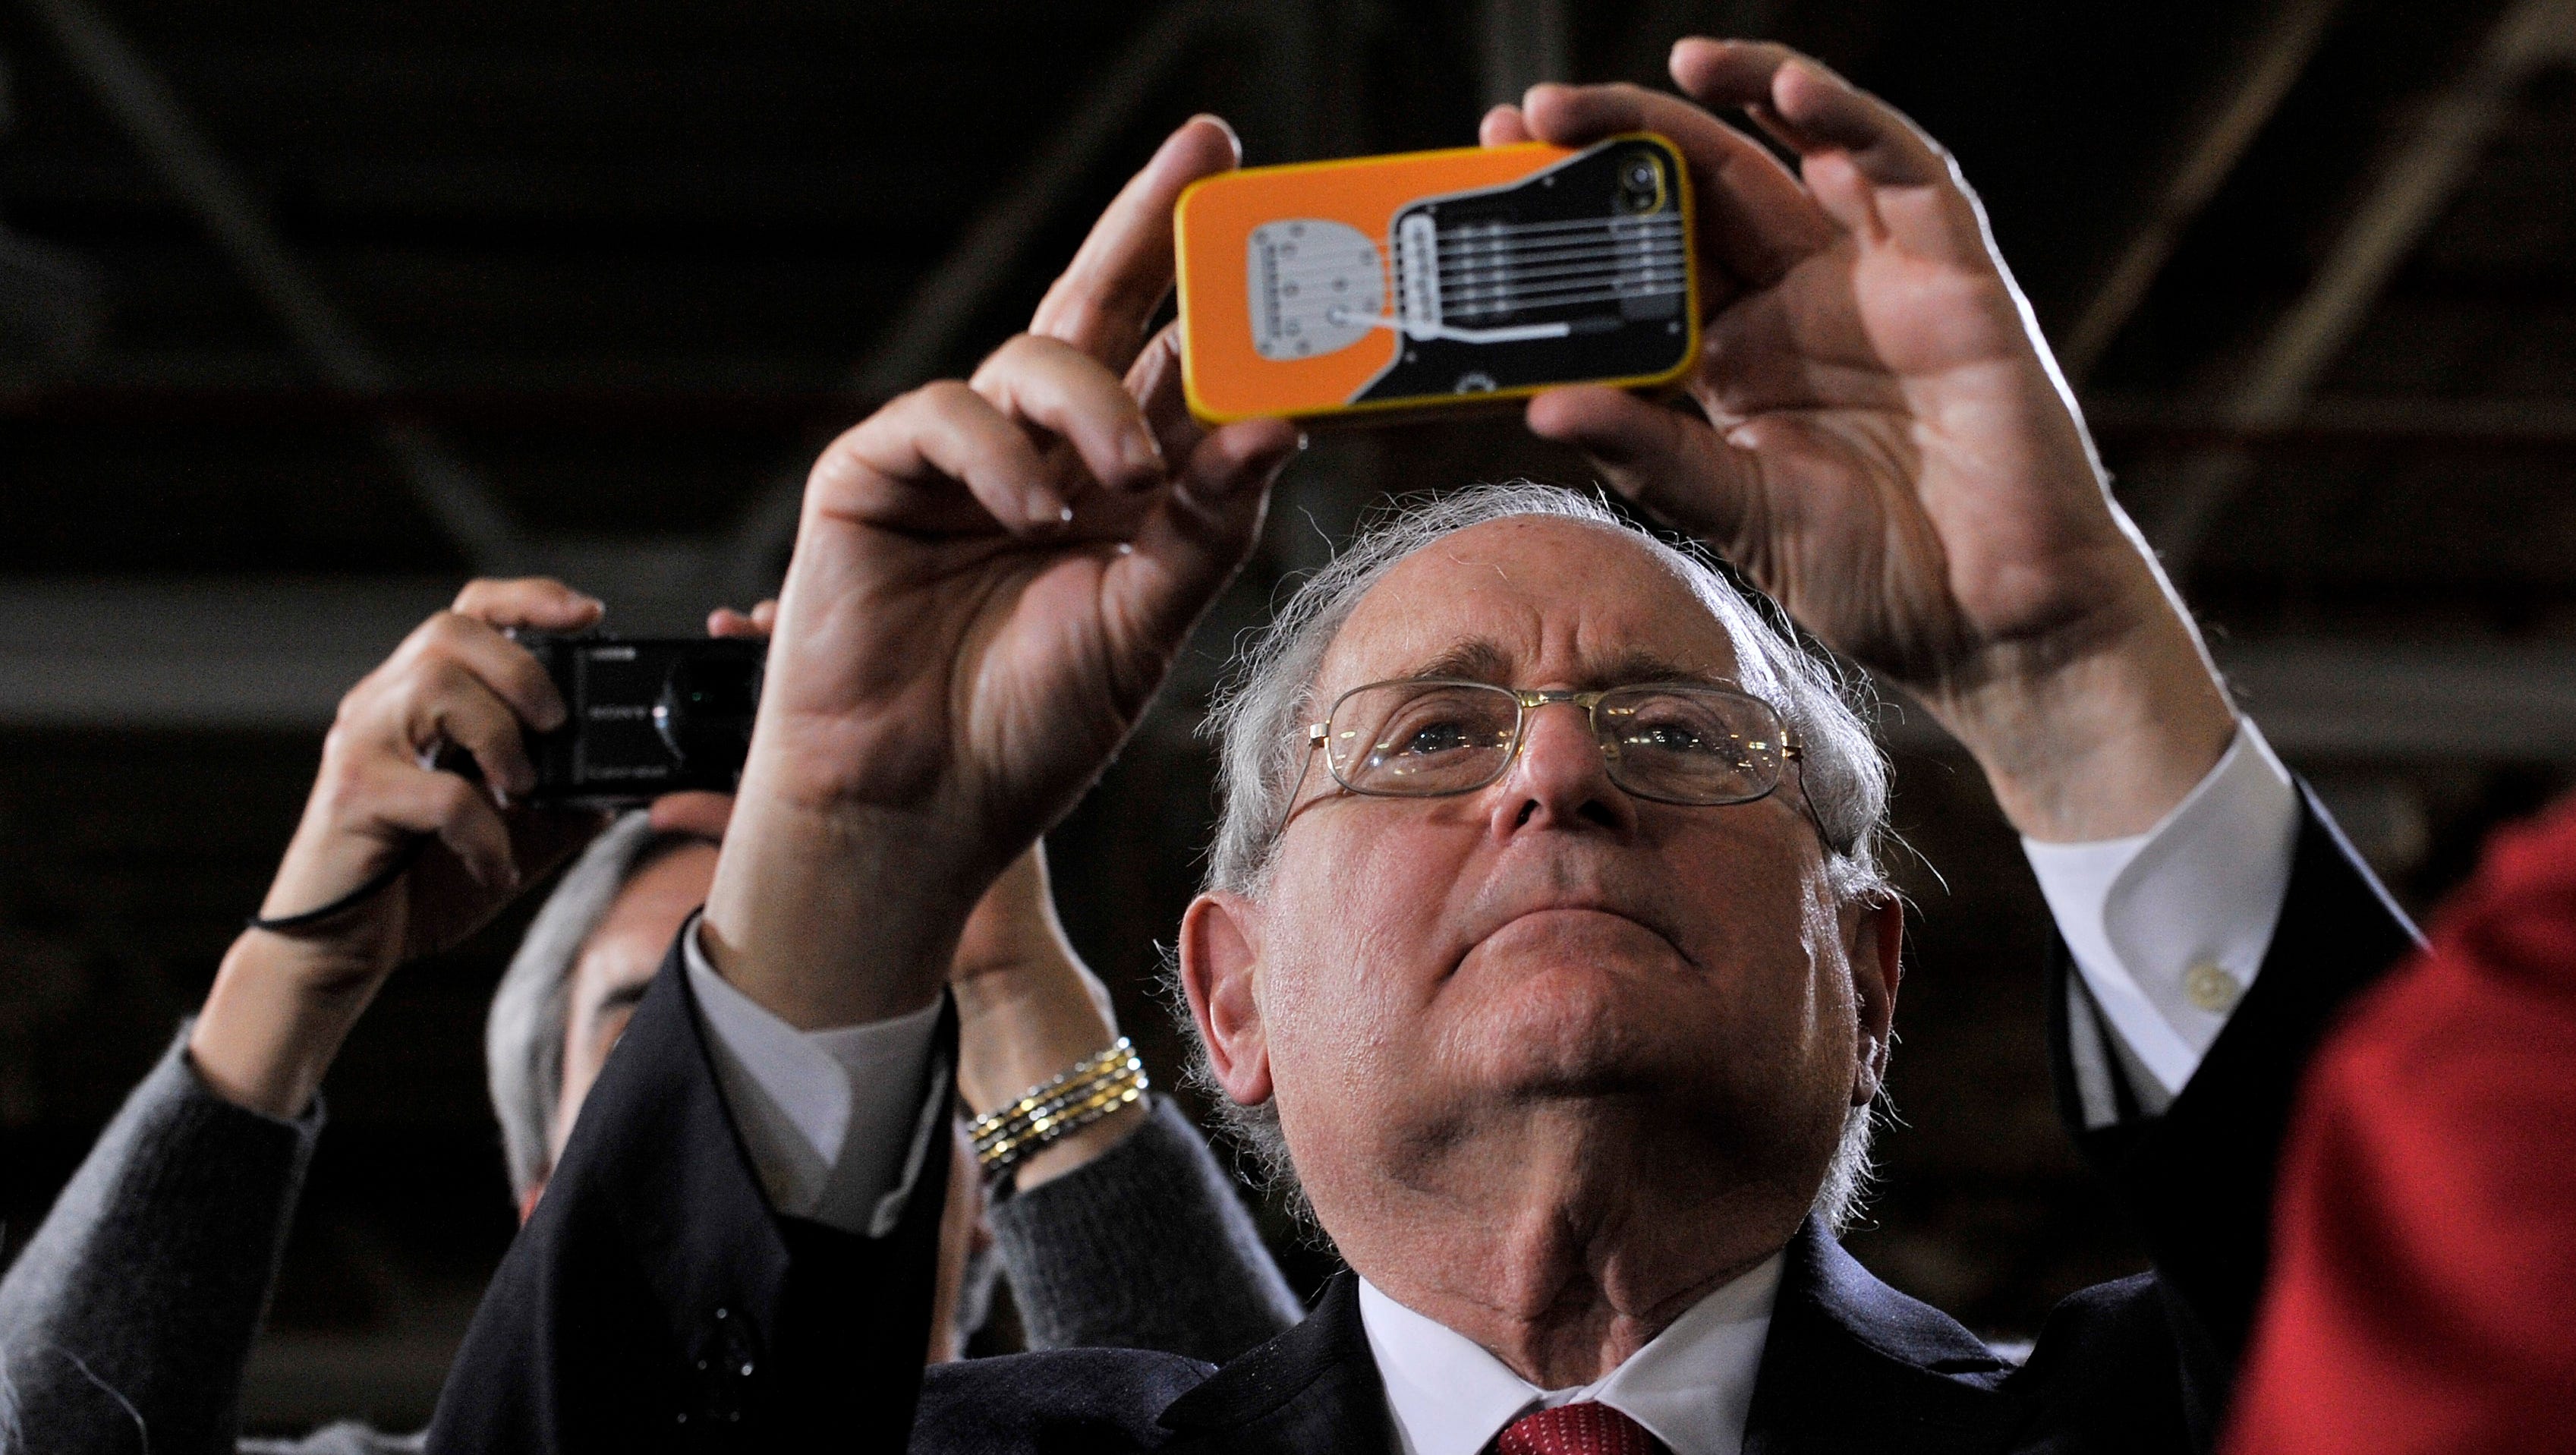 U.S. Sen. Carl Levin, D-Mich, takes a photo as President Barack Obama speaks at Detroit Diesel in Redford on Dec. 10, 2012. The Detroit Democrat, who chose not to seek re-election, said he plans to return to the state when he wraps up a political career that has focused on the military, manufacturing and other issues.